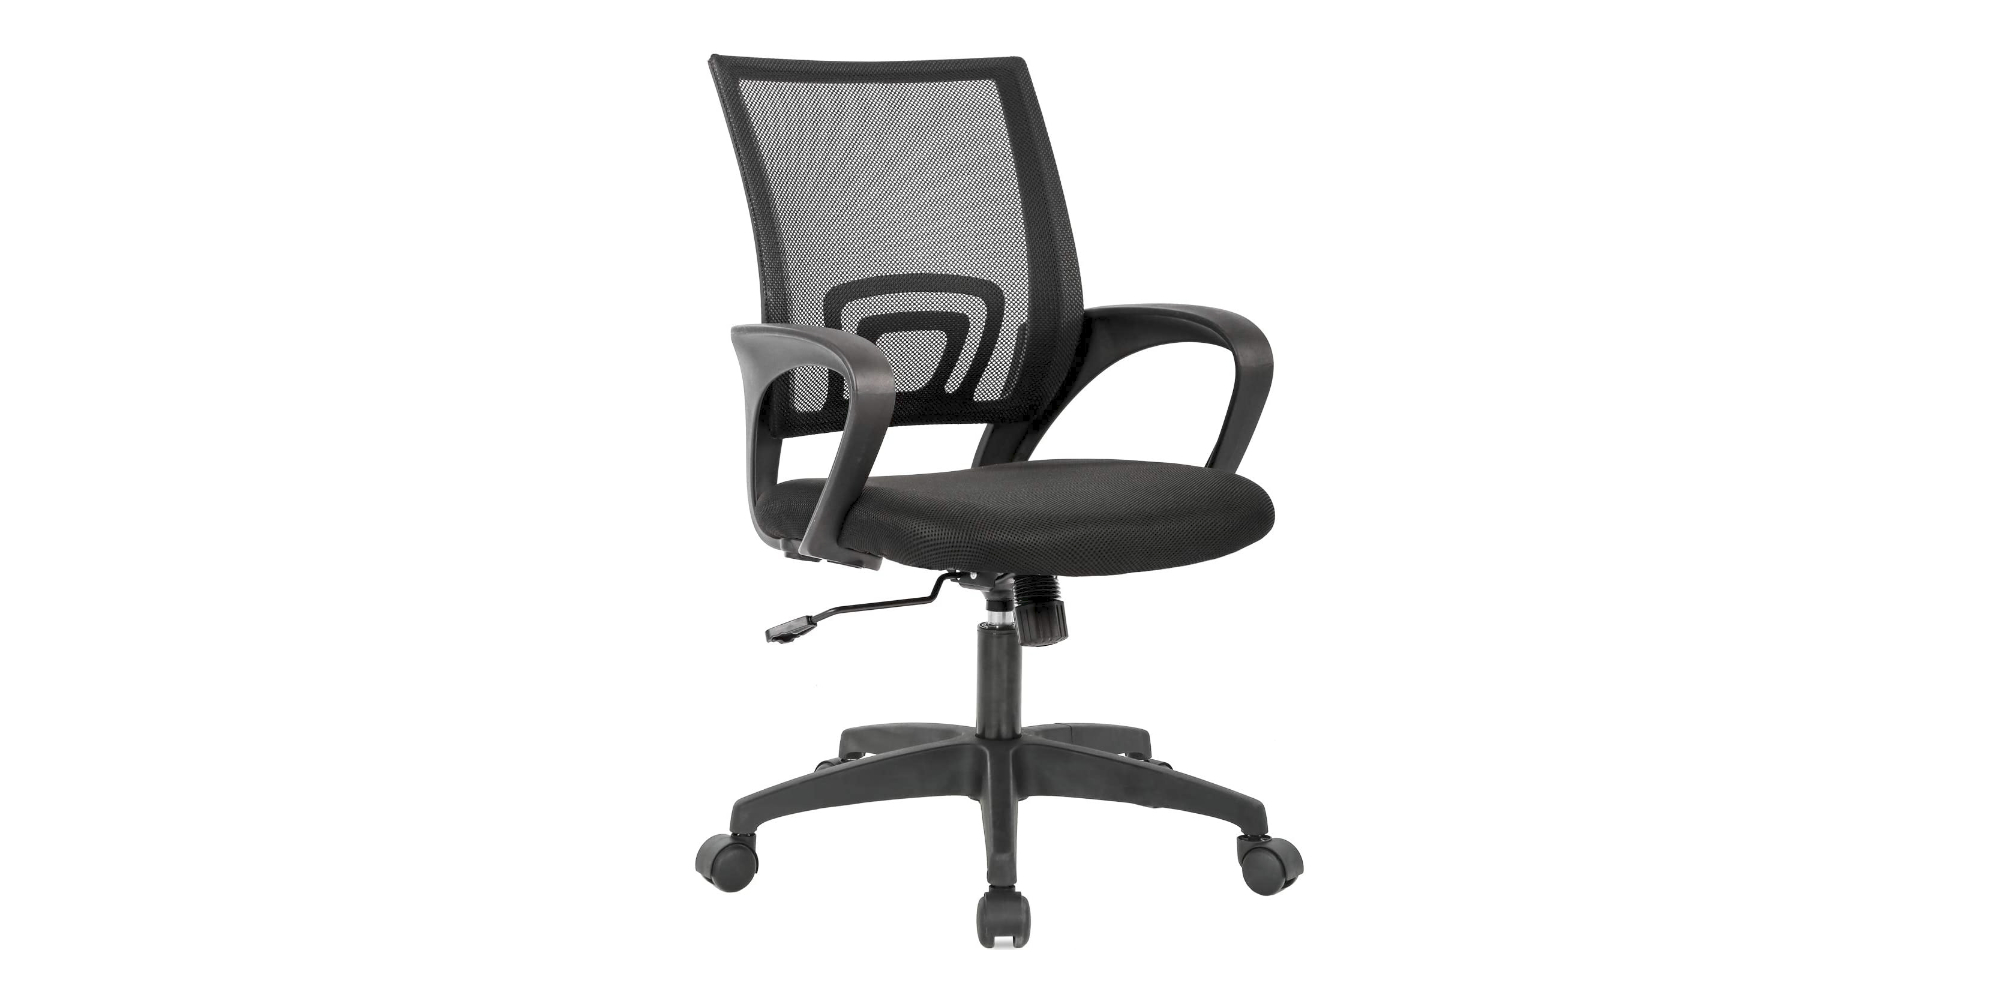 Amazon's #1 best-selling office chair plunges to new all-time low of $44.50